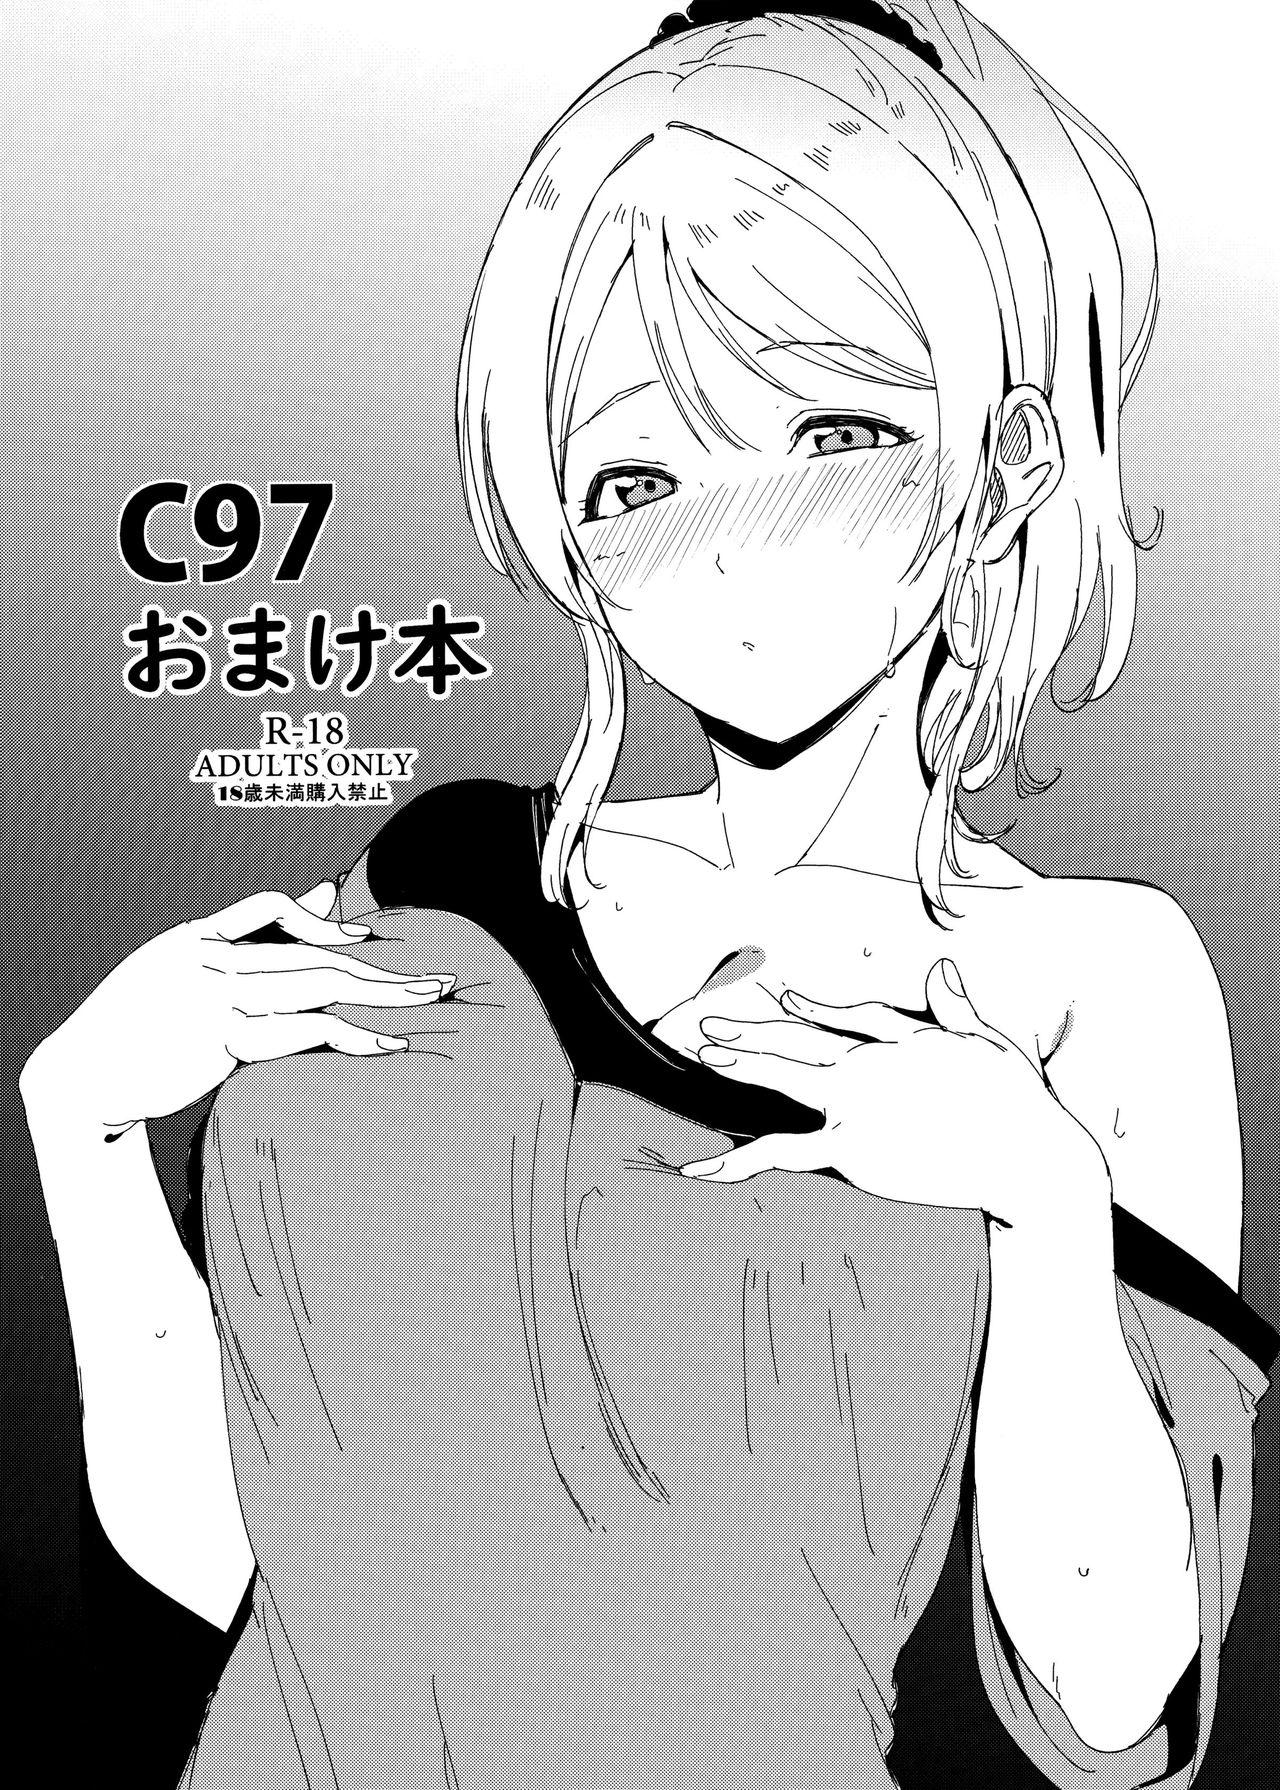 Pussy Fuck C97 Omakebon - Love live Art - Picture 1